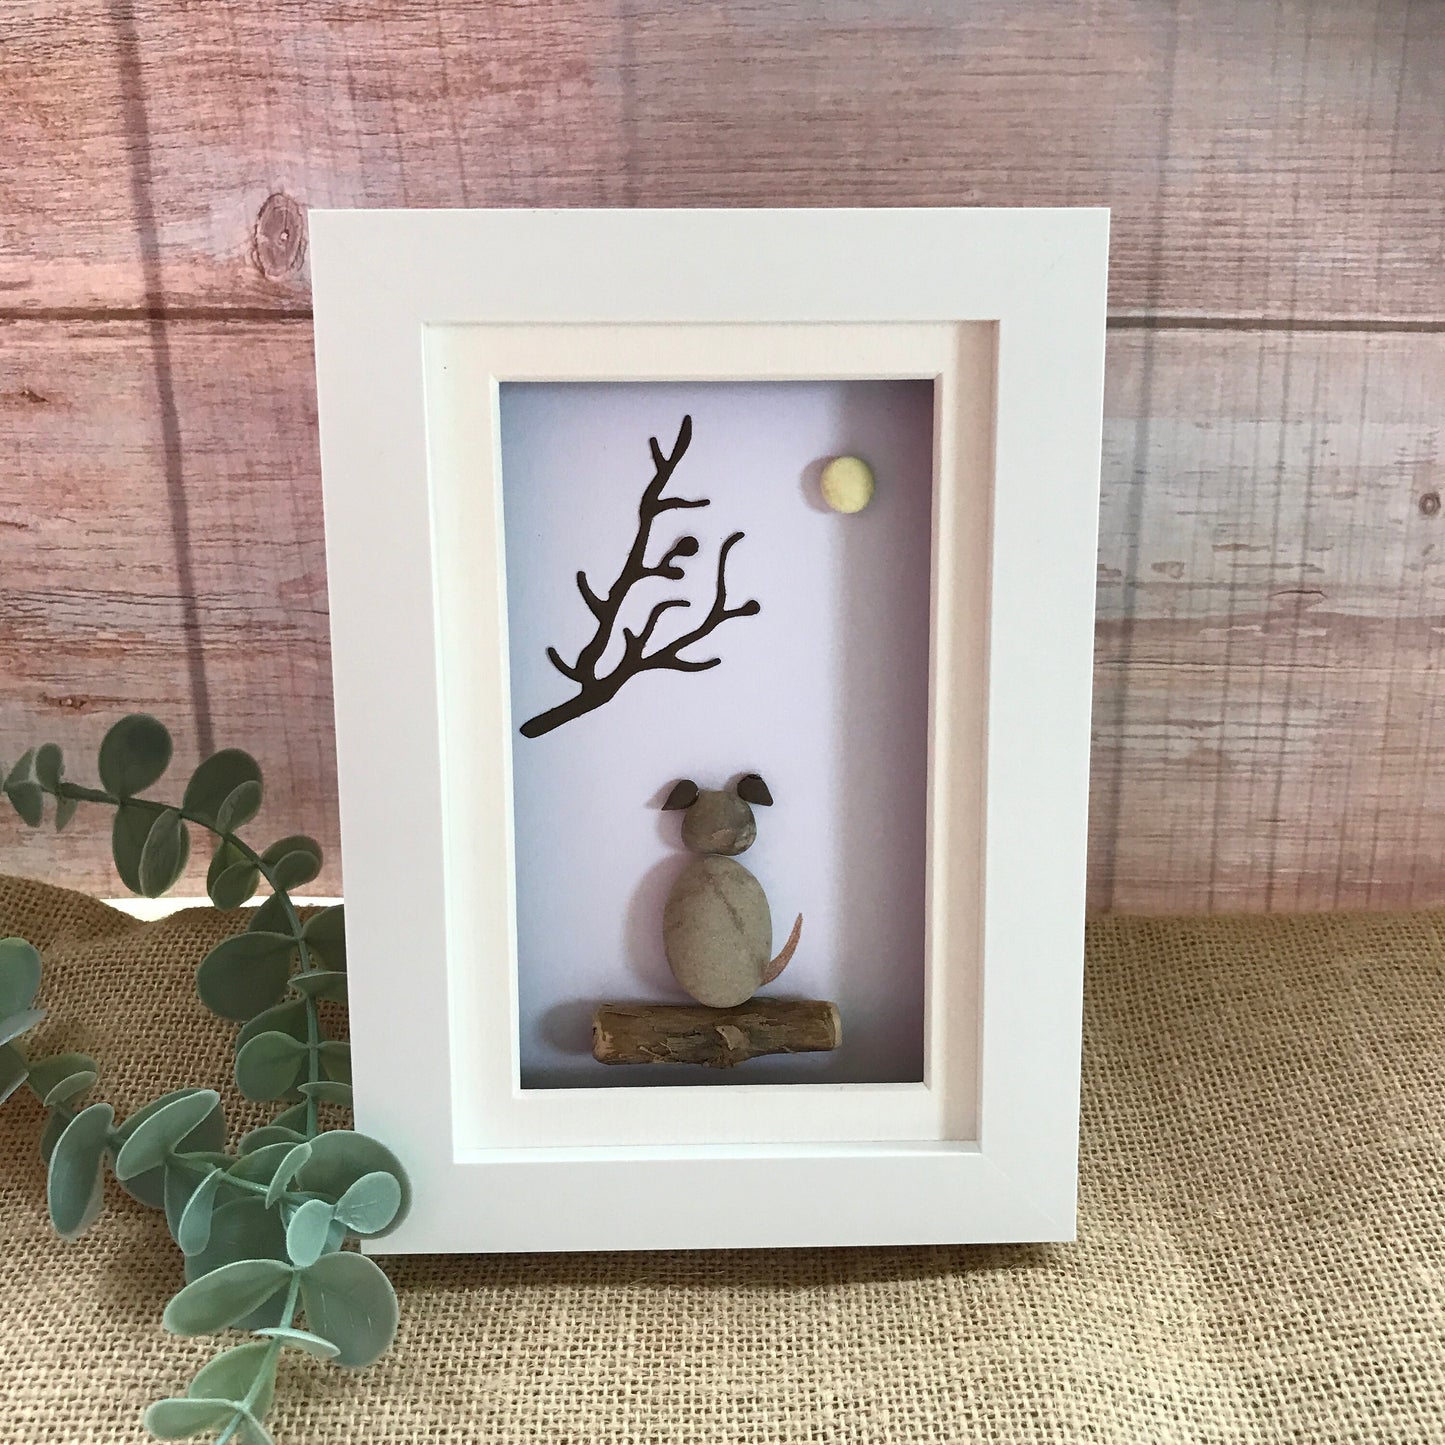 Handmade Dog and Moon Pebble Art Picture